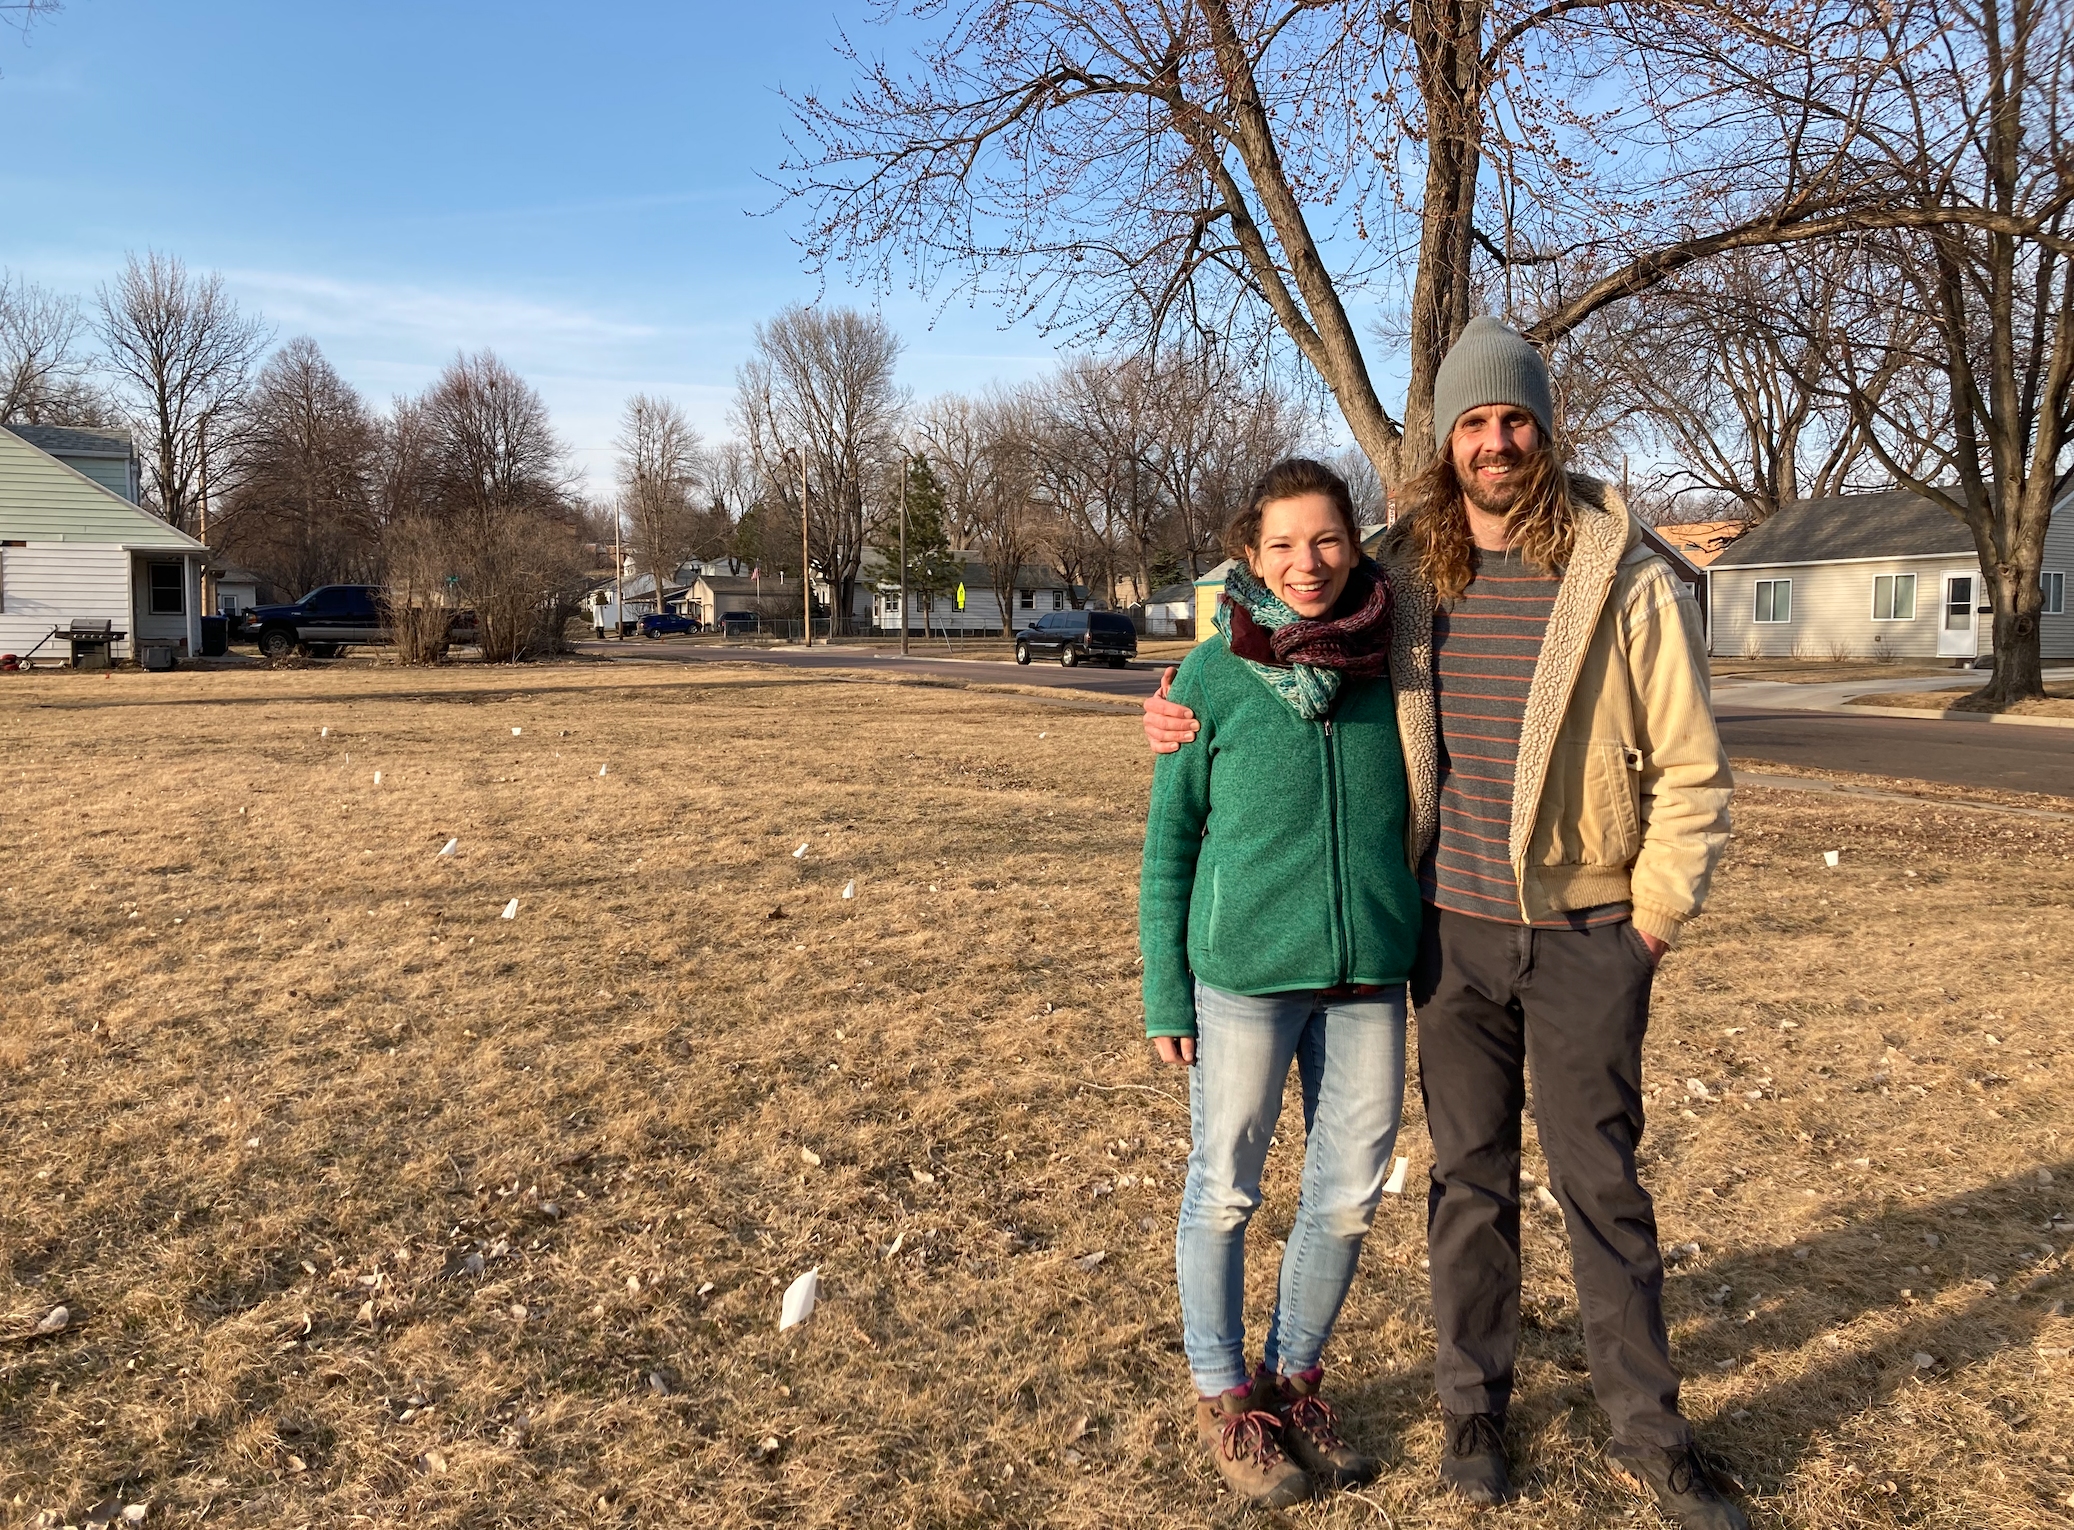 This couple is turning a vacant lot into an urban farm